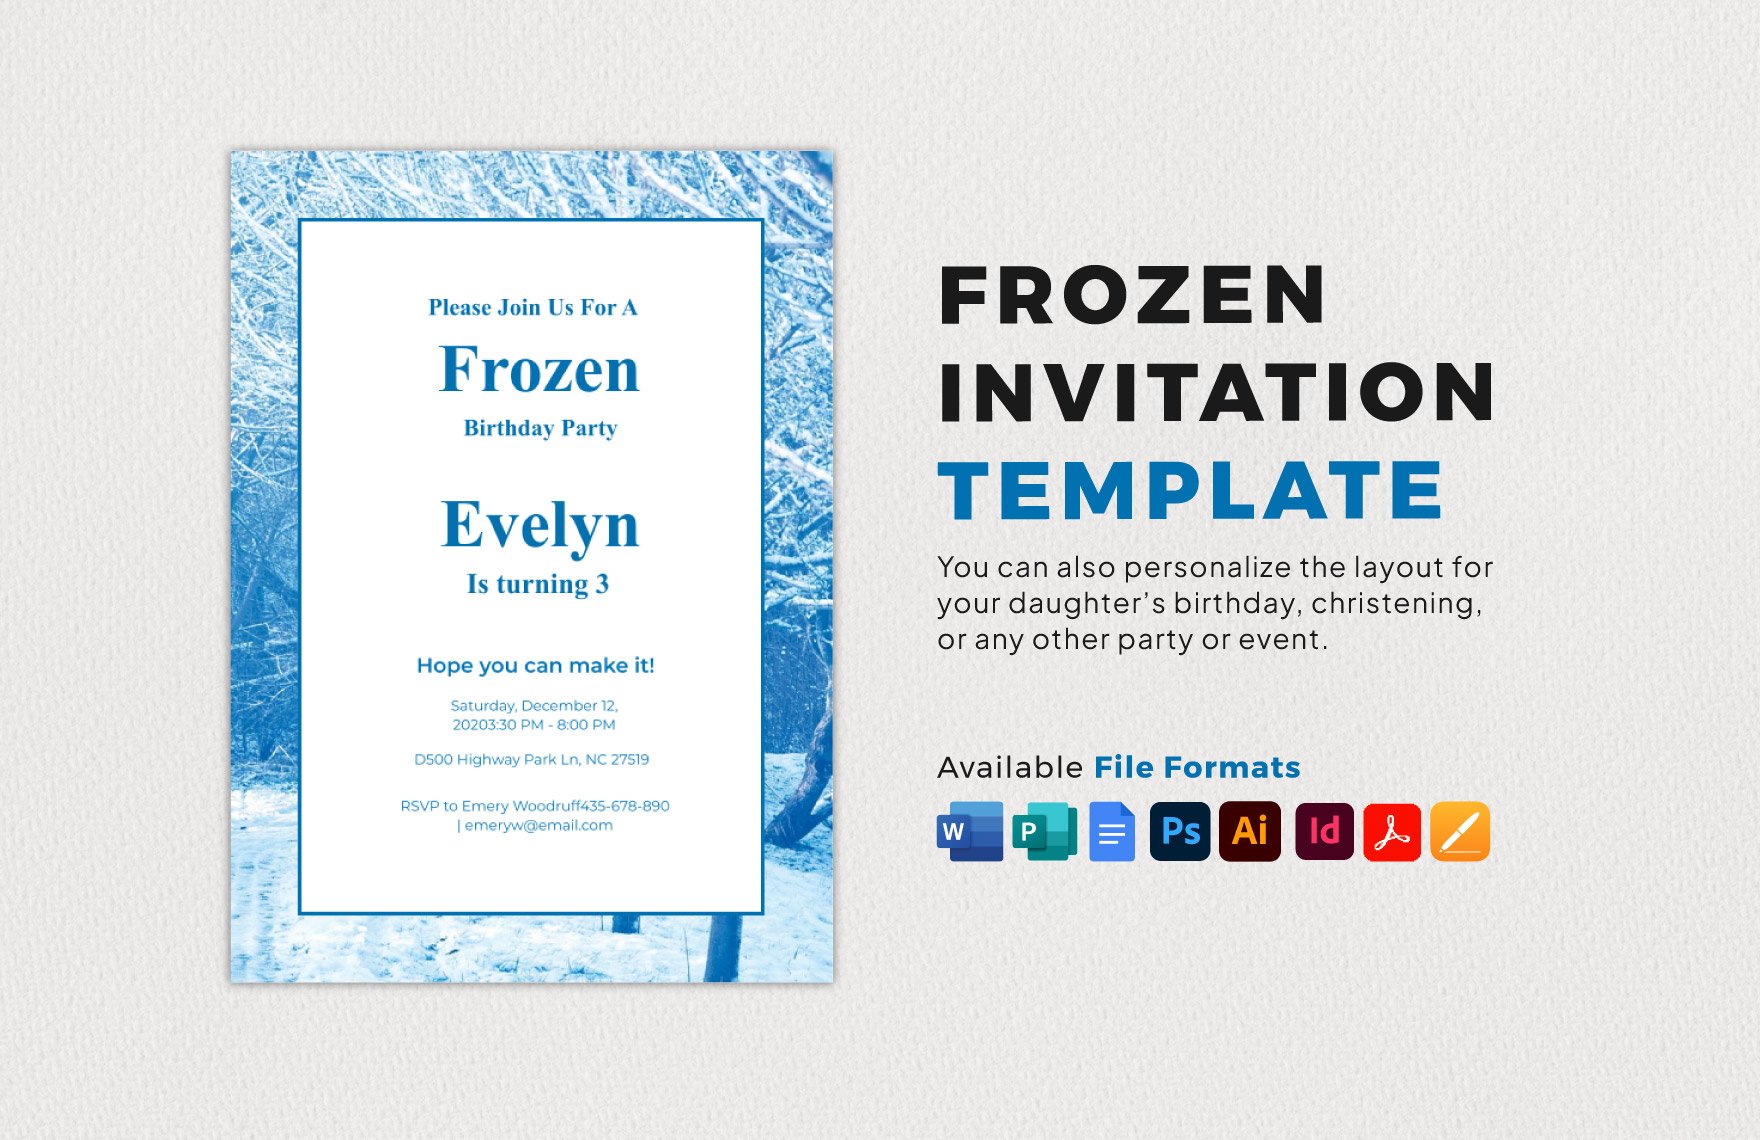 Frozen Invitation Template in Word, Google Docs, PDF, Illustrator, PSD, Apple Pages, Publisher, InDesign